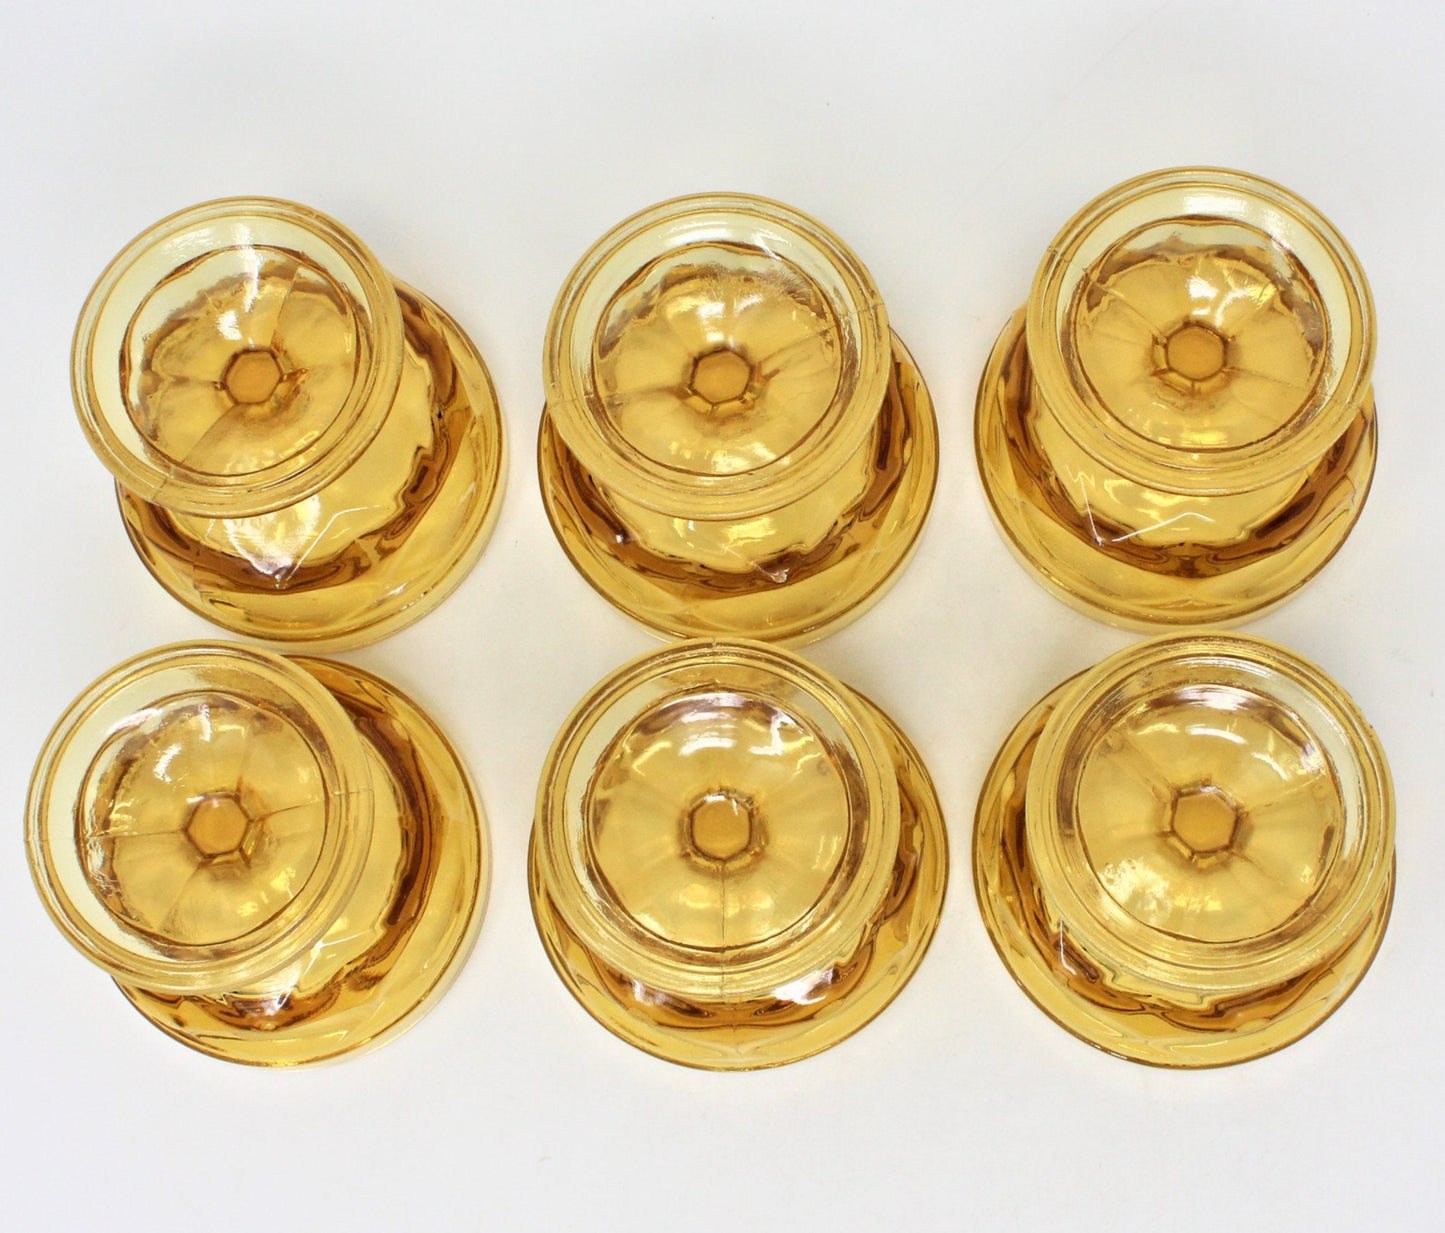 Champagne / Low Sherbet, Anchor Hocking, Fairfield, Amber Glass, Set of 6, Vintage